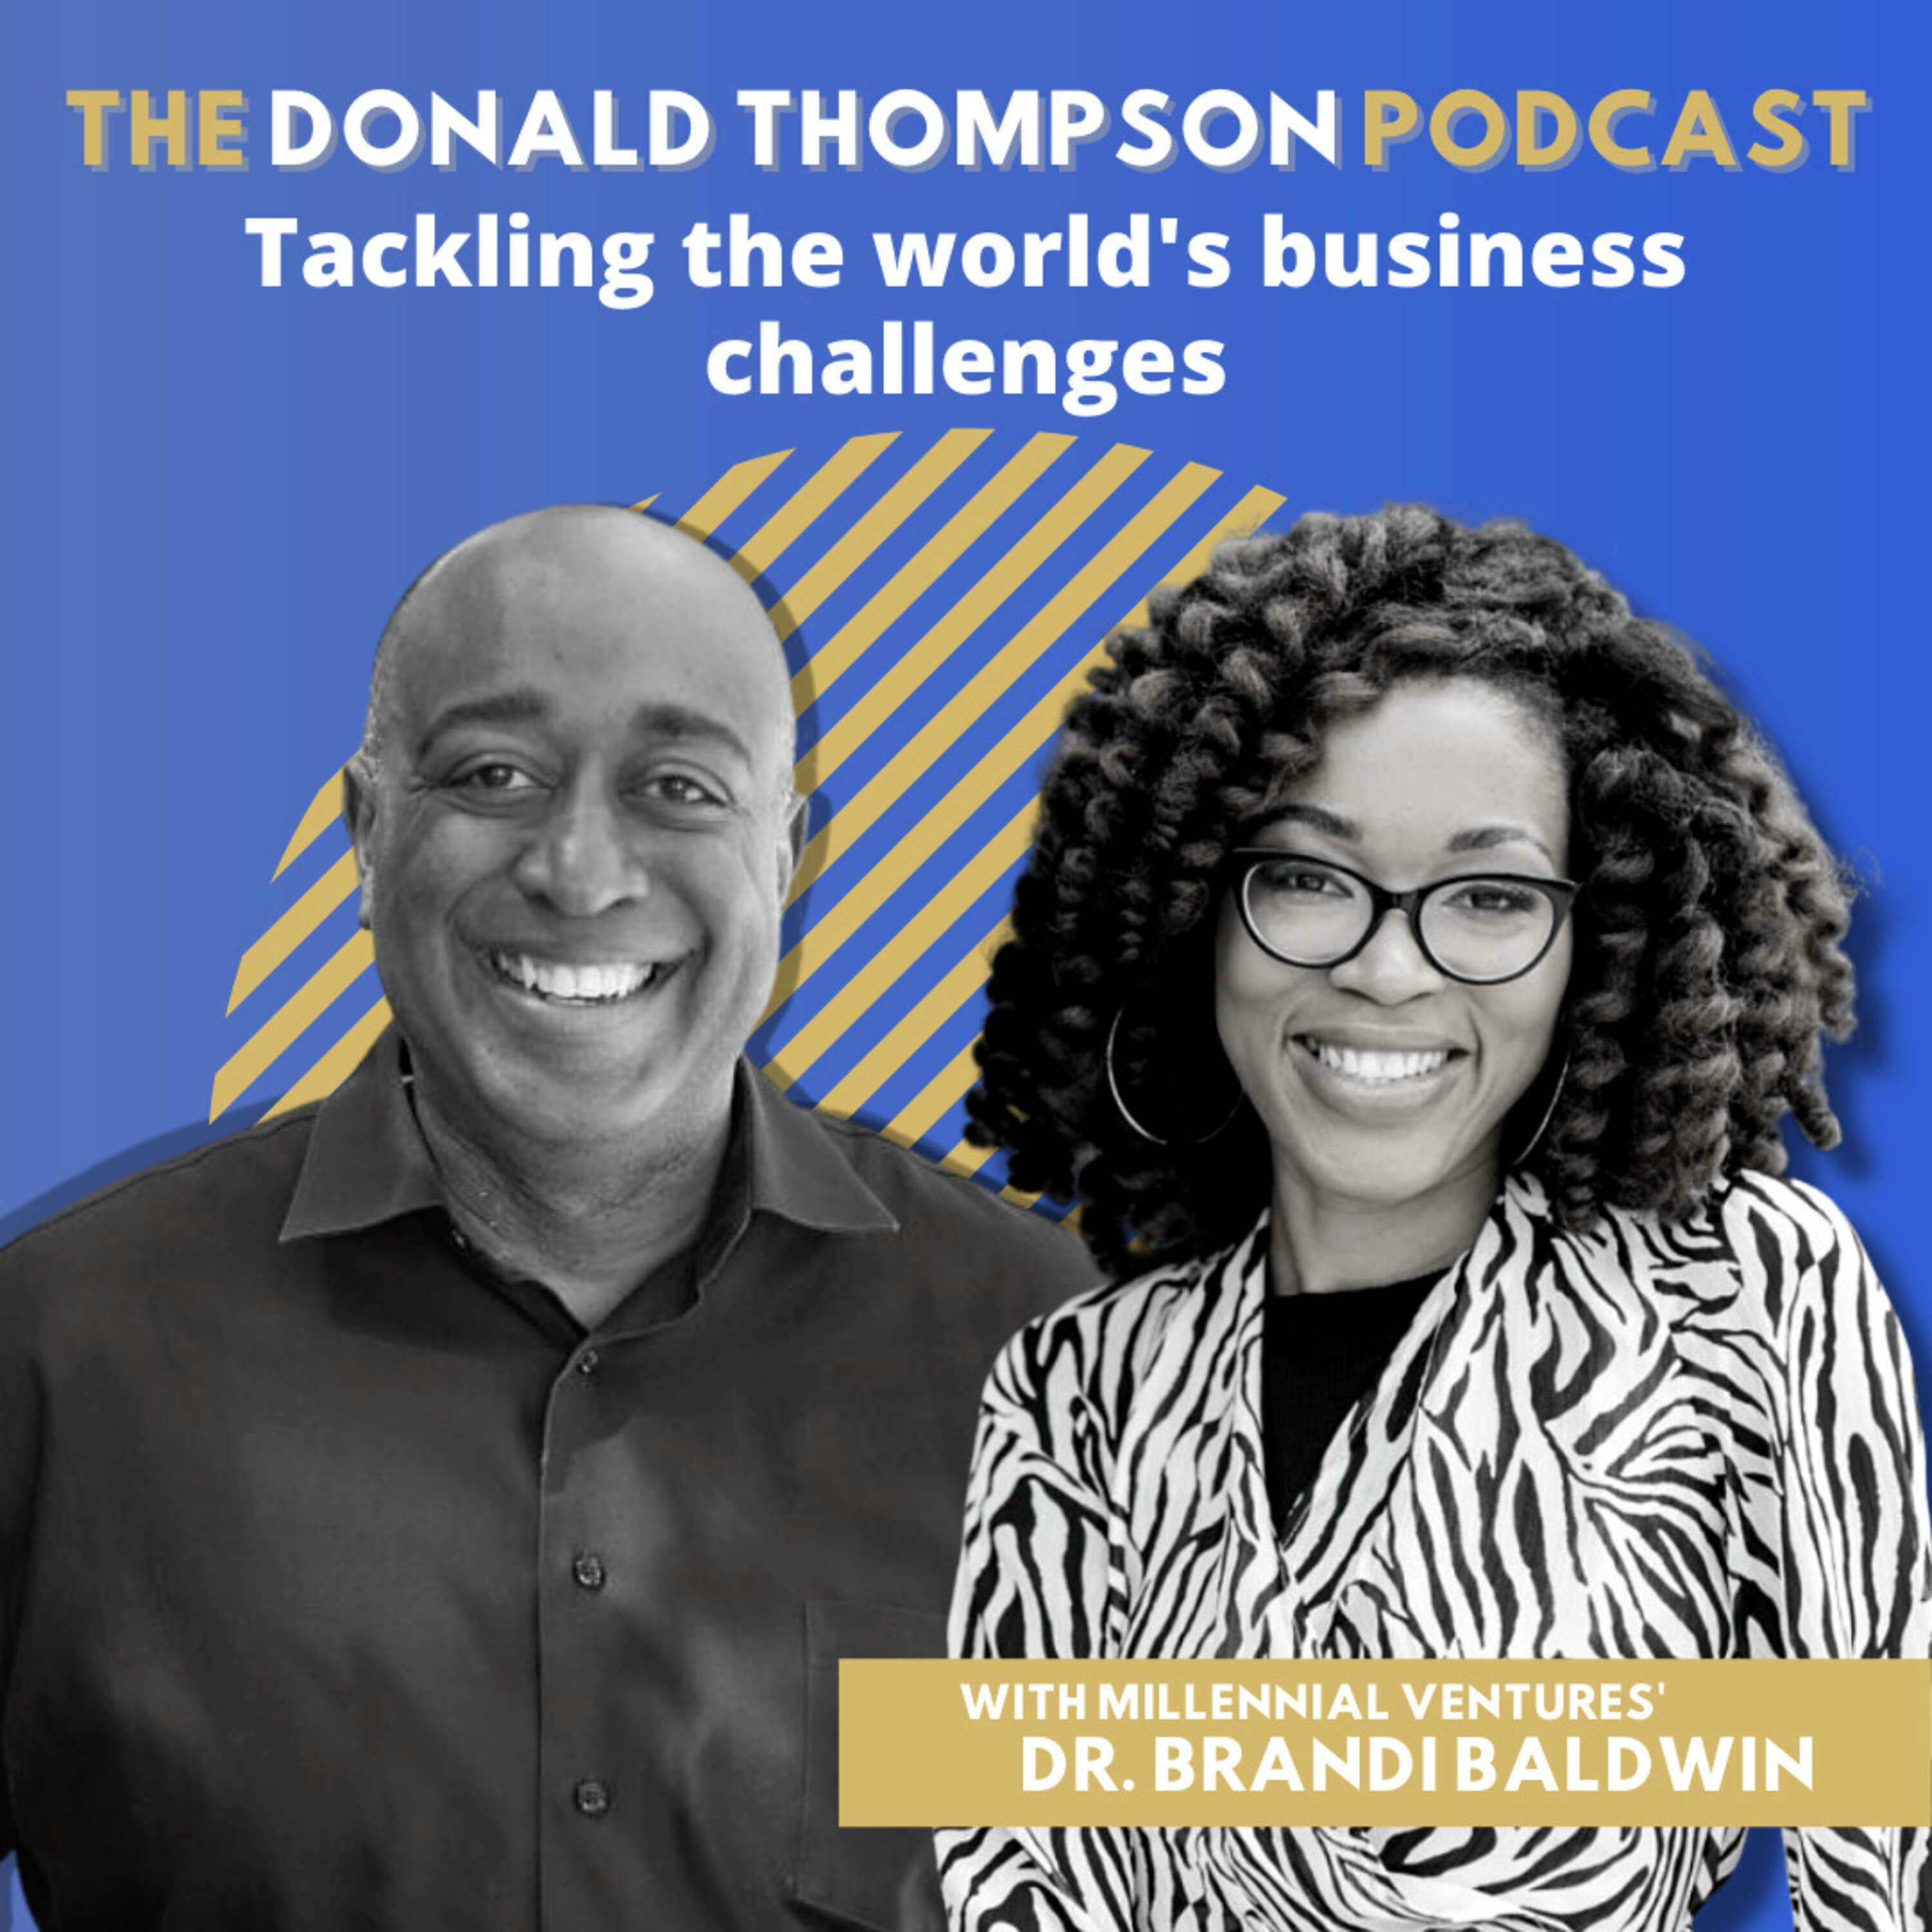 Tackling the world's business challenges, with Dr. Brandi Baldwin of Millennial Ventures